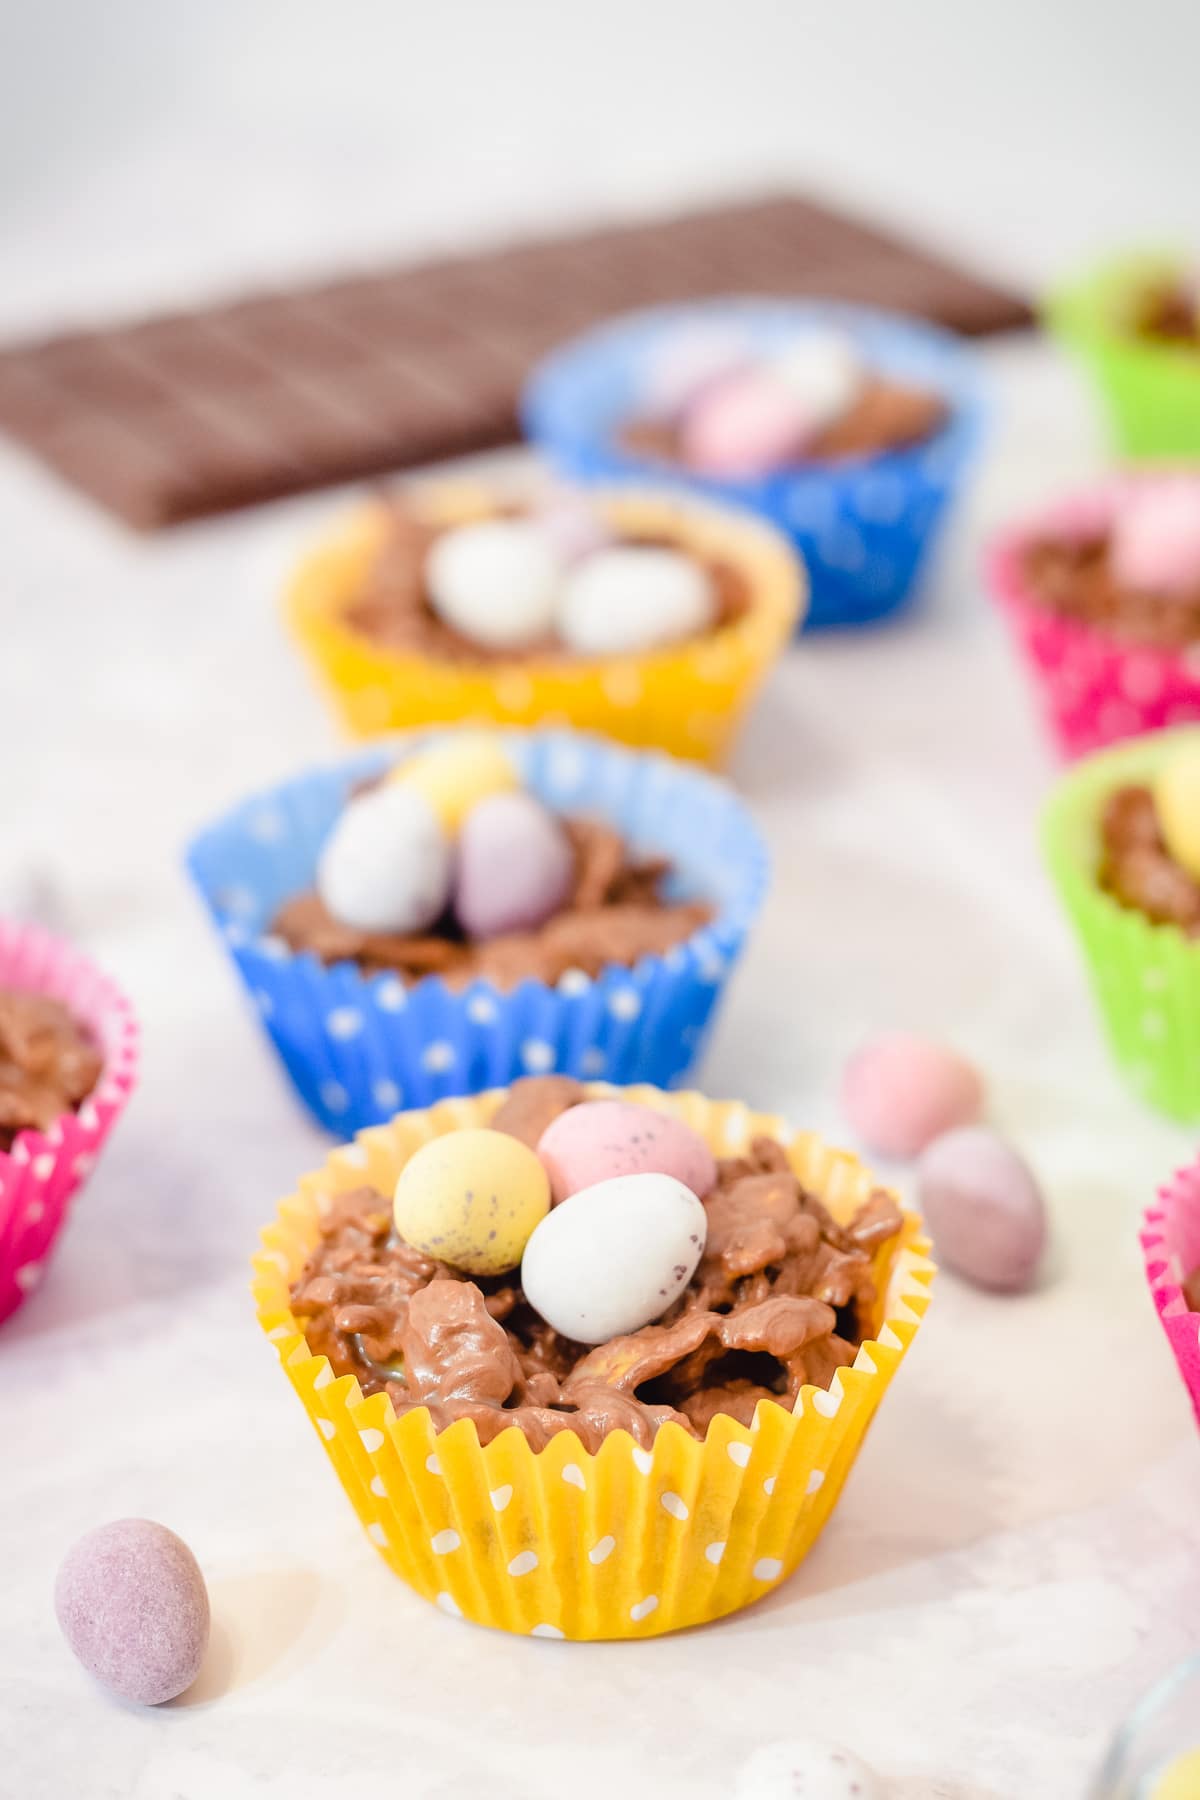 Chocolate cornflake nest eggs
The cornflakes are covered in chocolate and in a cupcake liner with egg candies on top